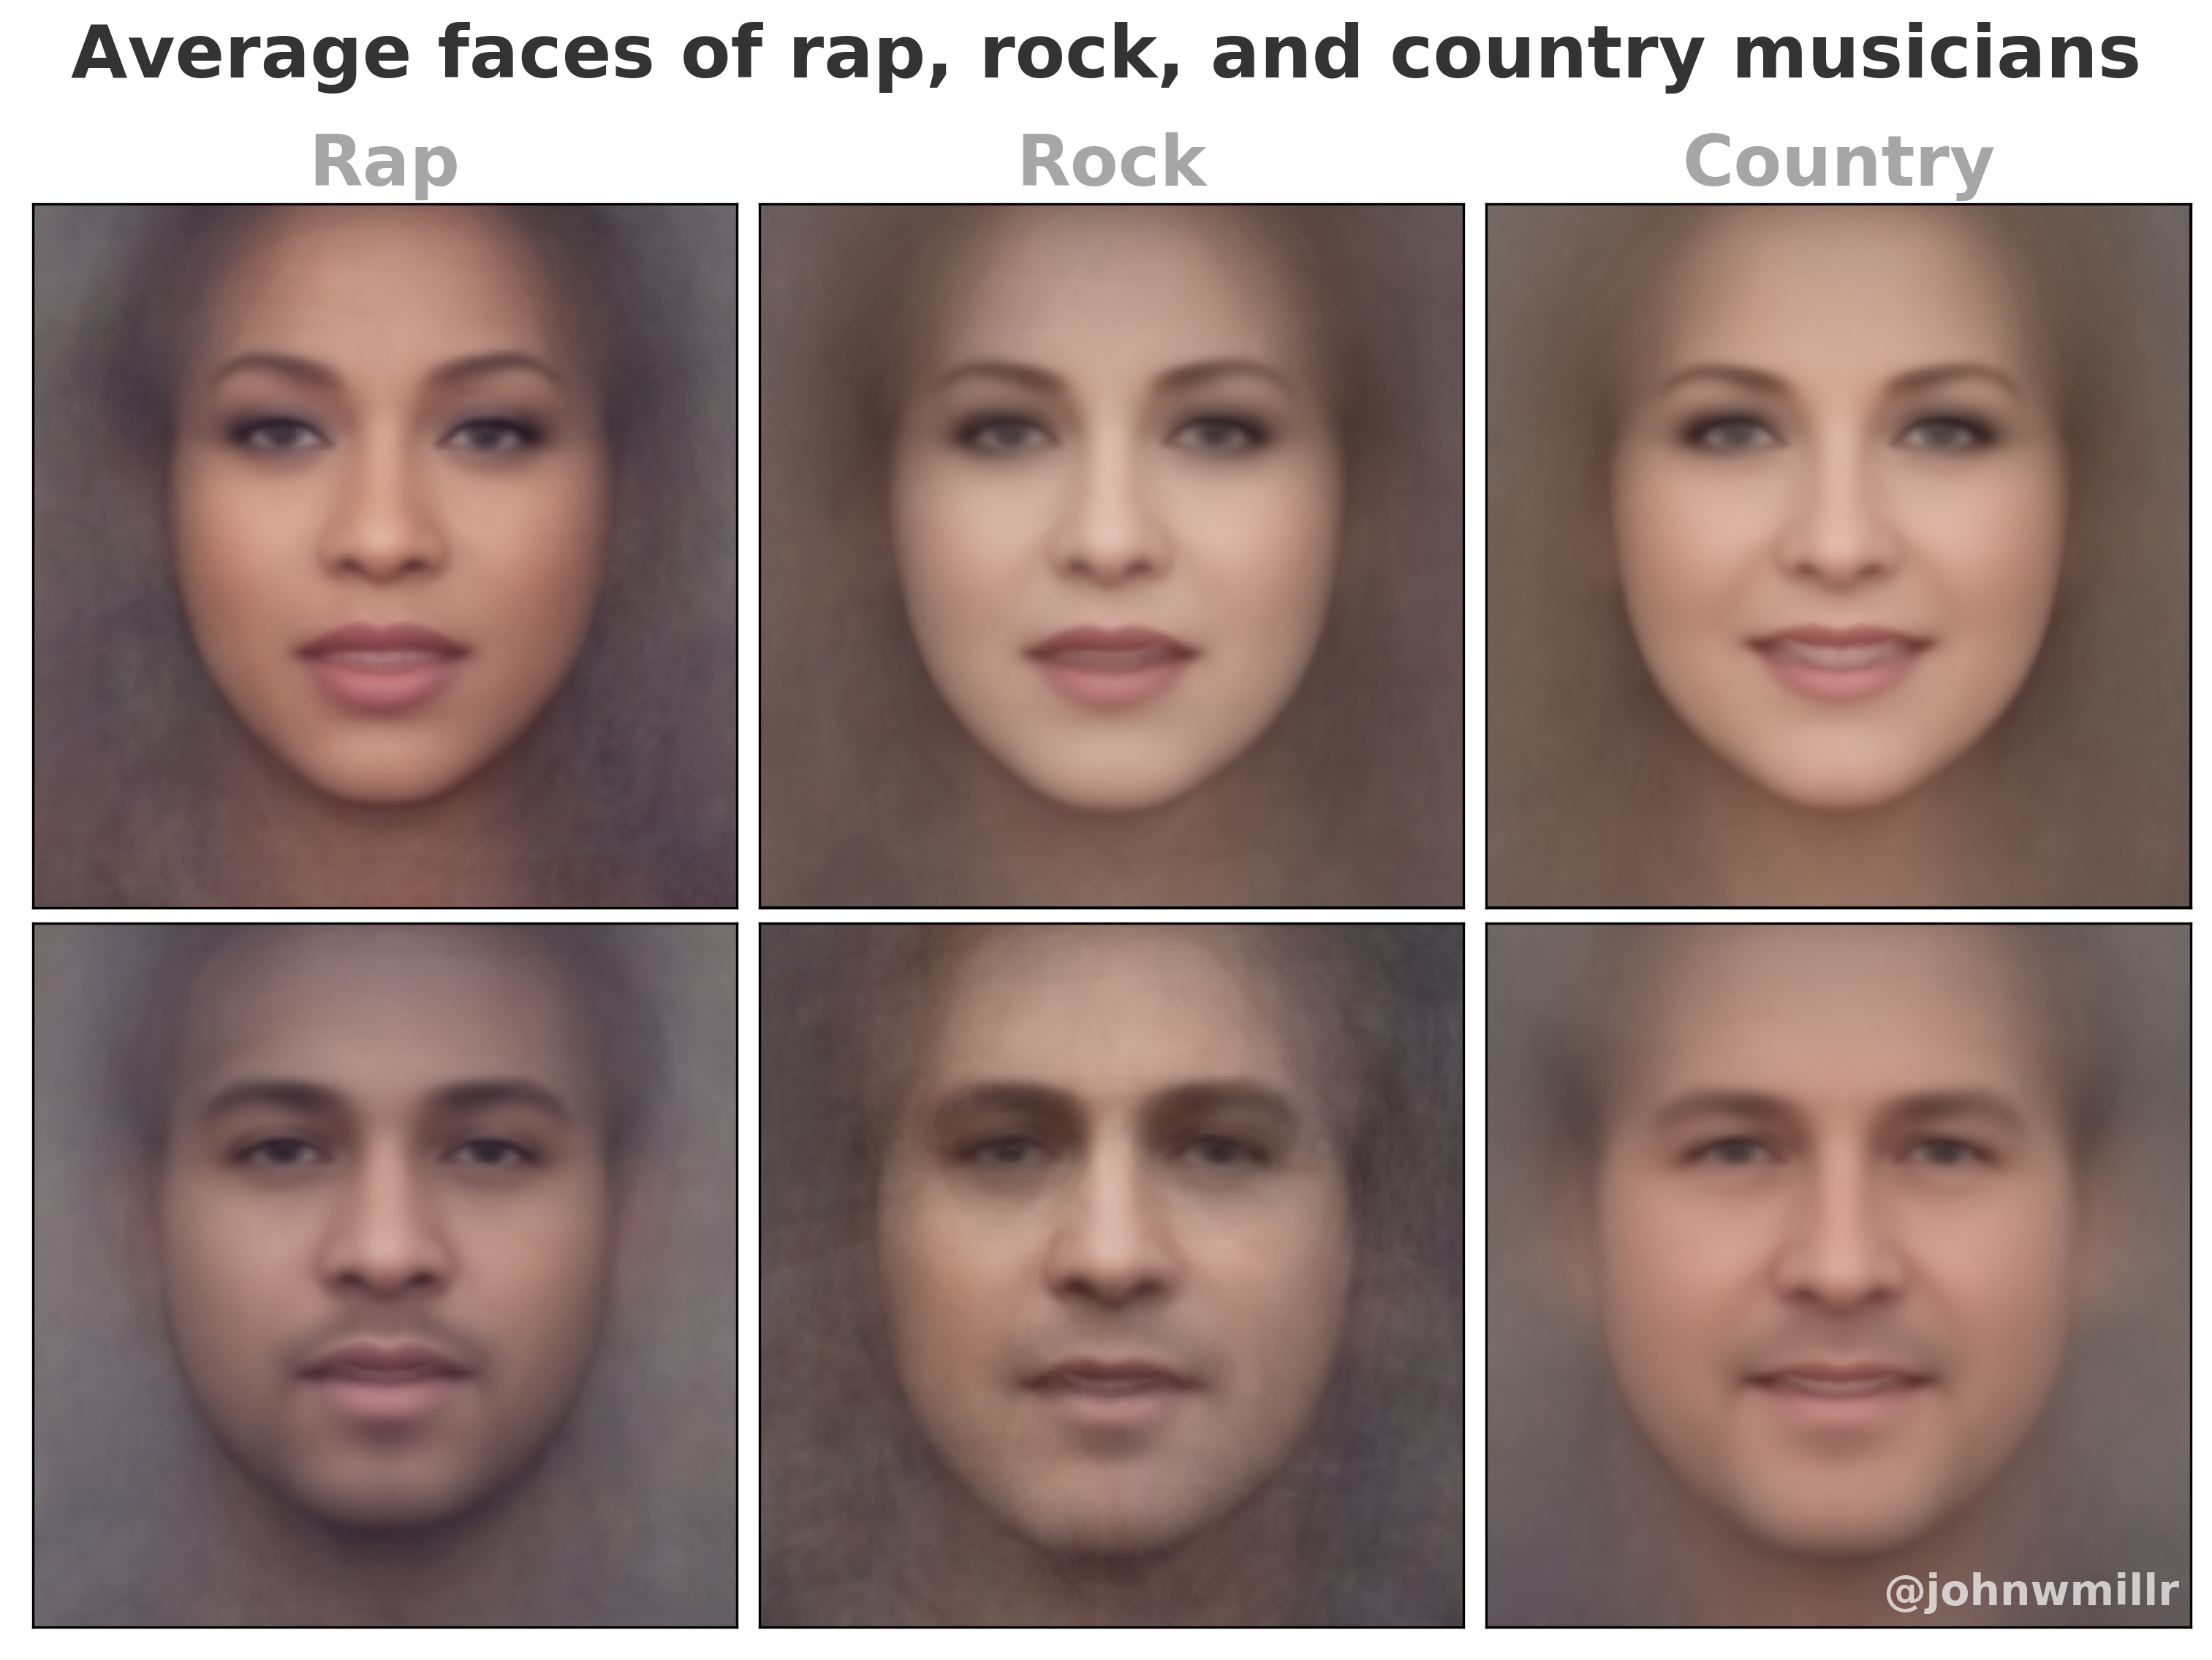 Average faces of rap, rock, and country music